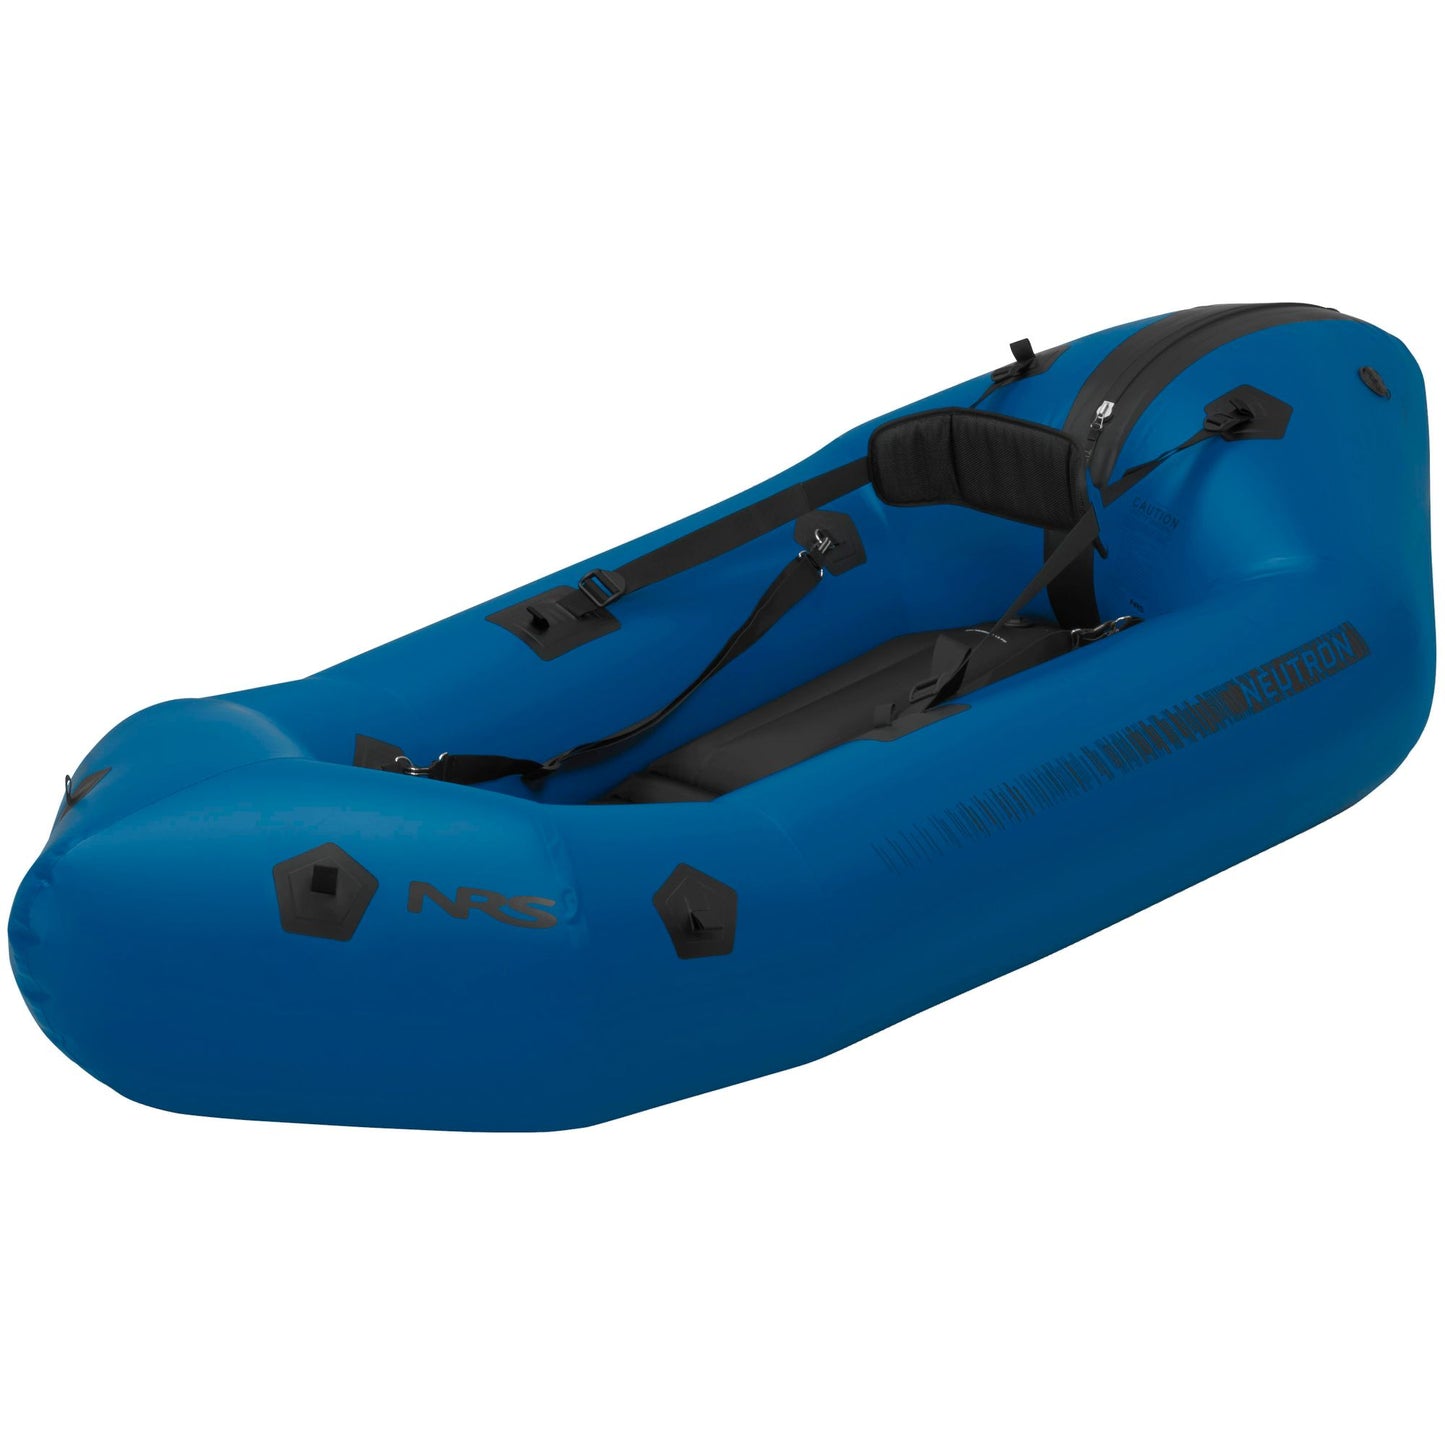 Inflatable blue Neutron Packraft with adjustable seating, footrests, and a self-bailing floor by NRS.